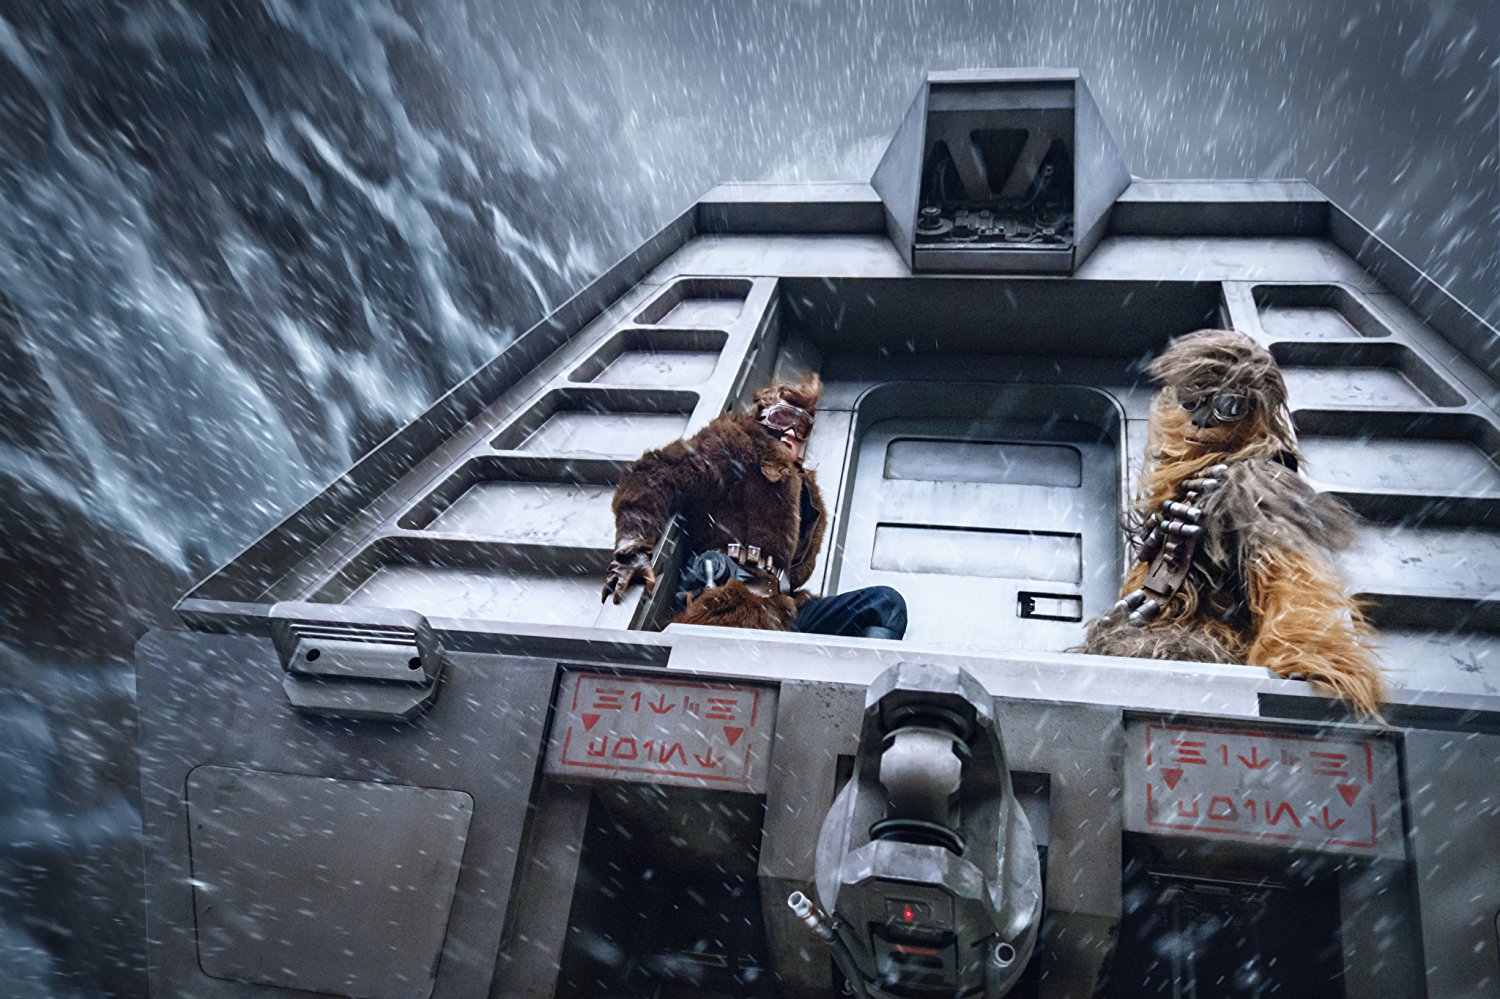 ‘Solo: A Star Wars Story’ is a perfectly adequate Star Wars film